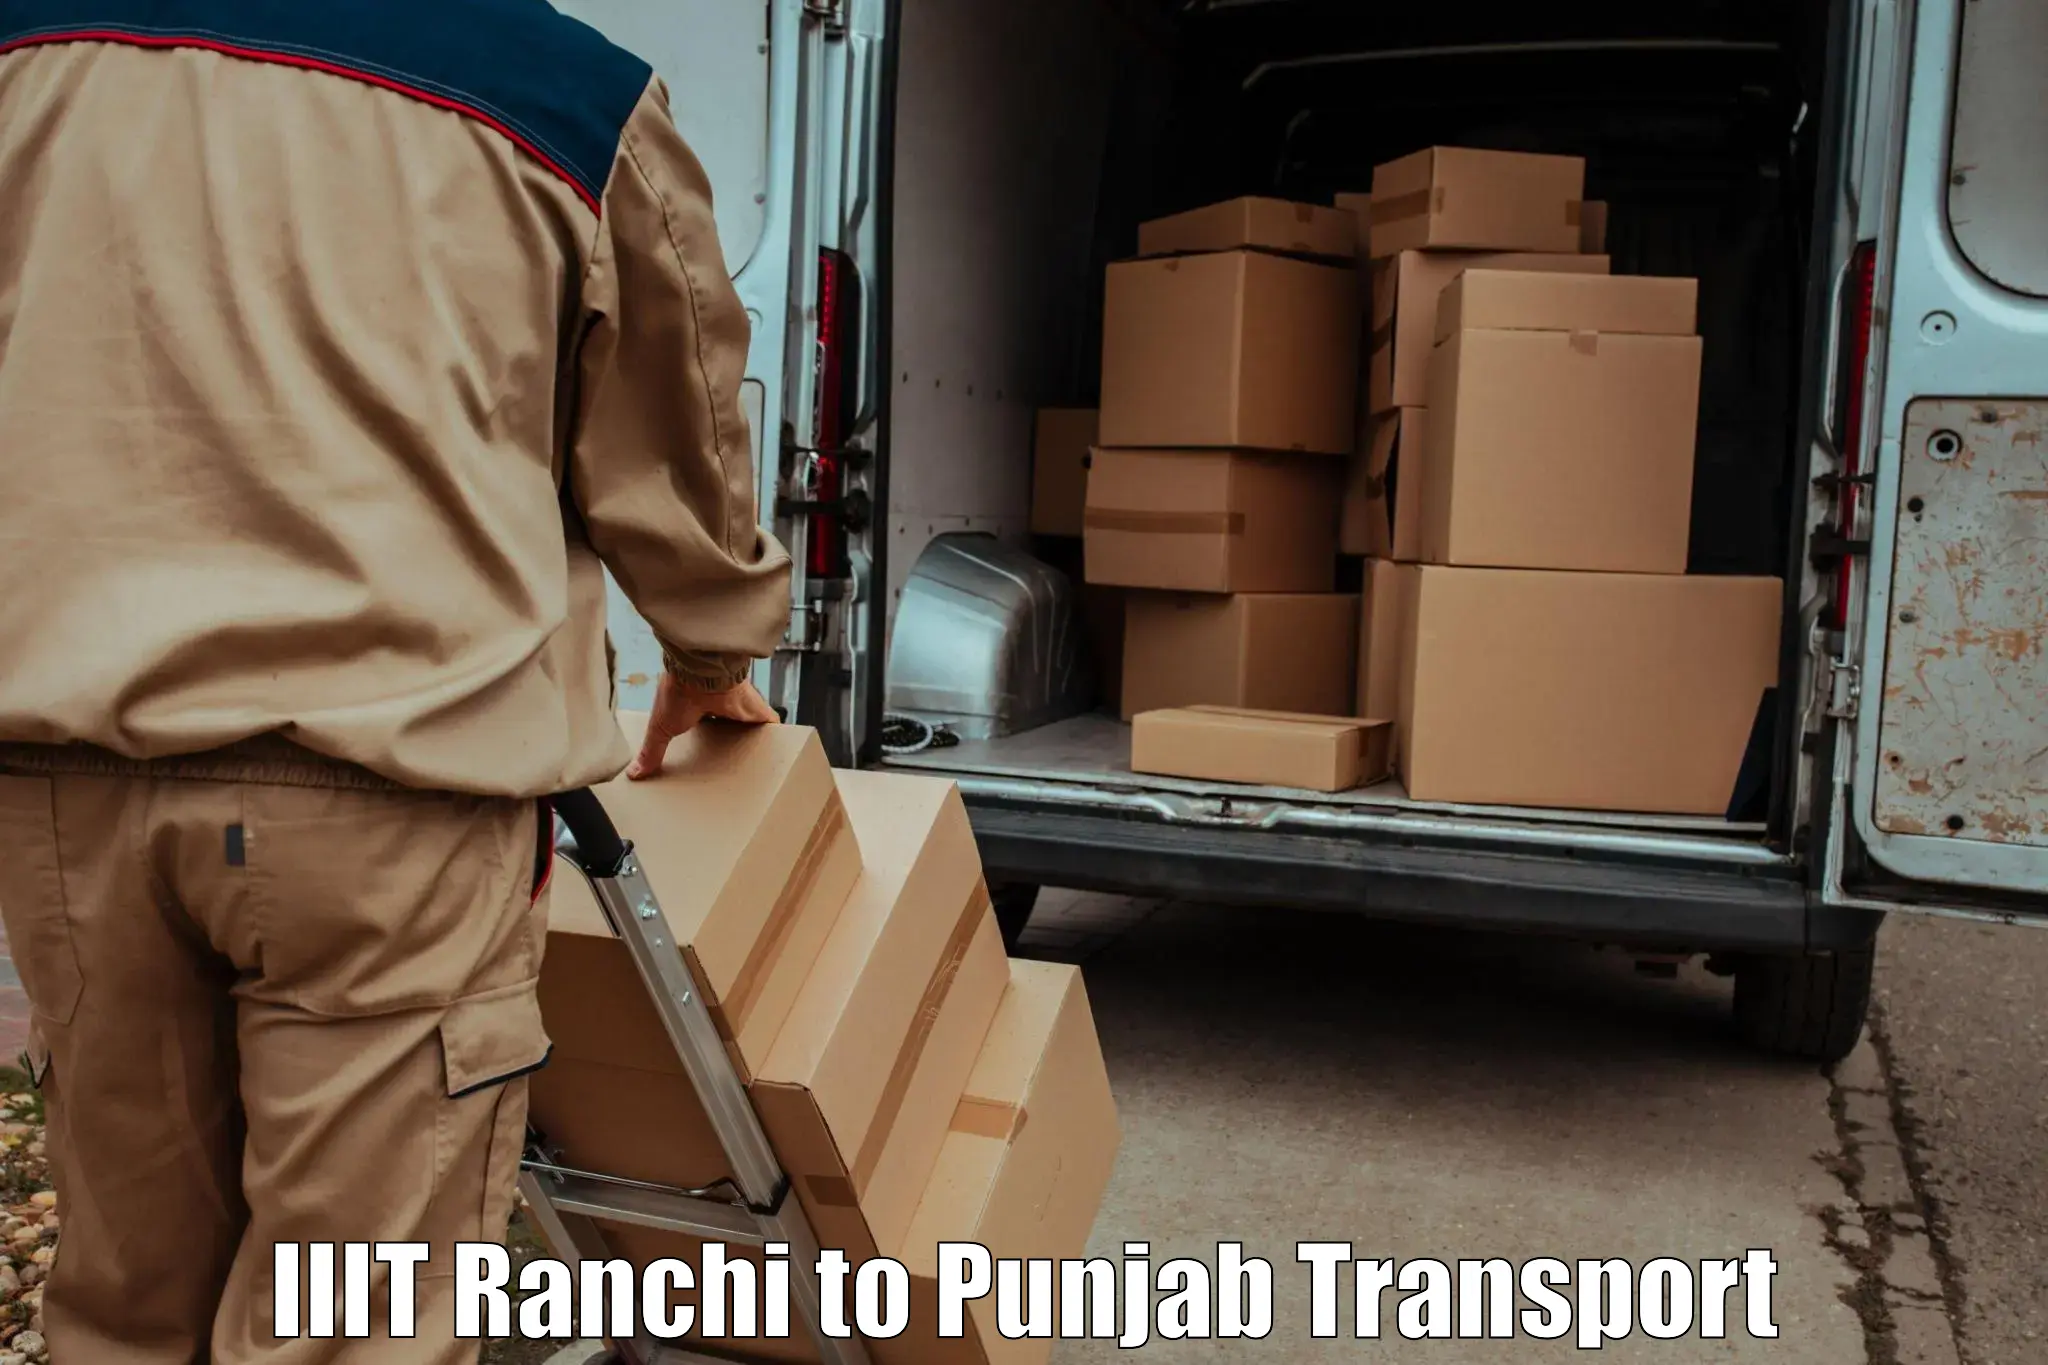 Road transport services IIIT Ranchi to Sultanpur Lodhi